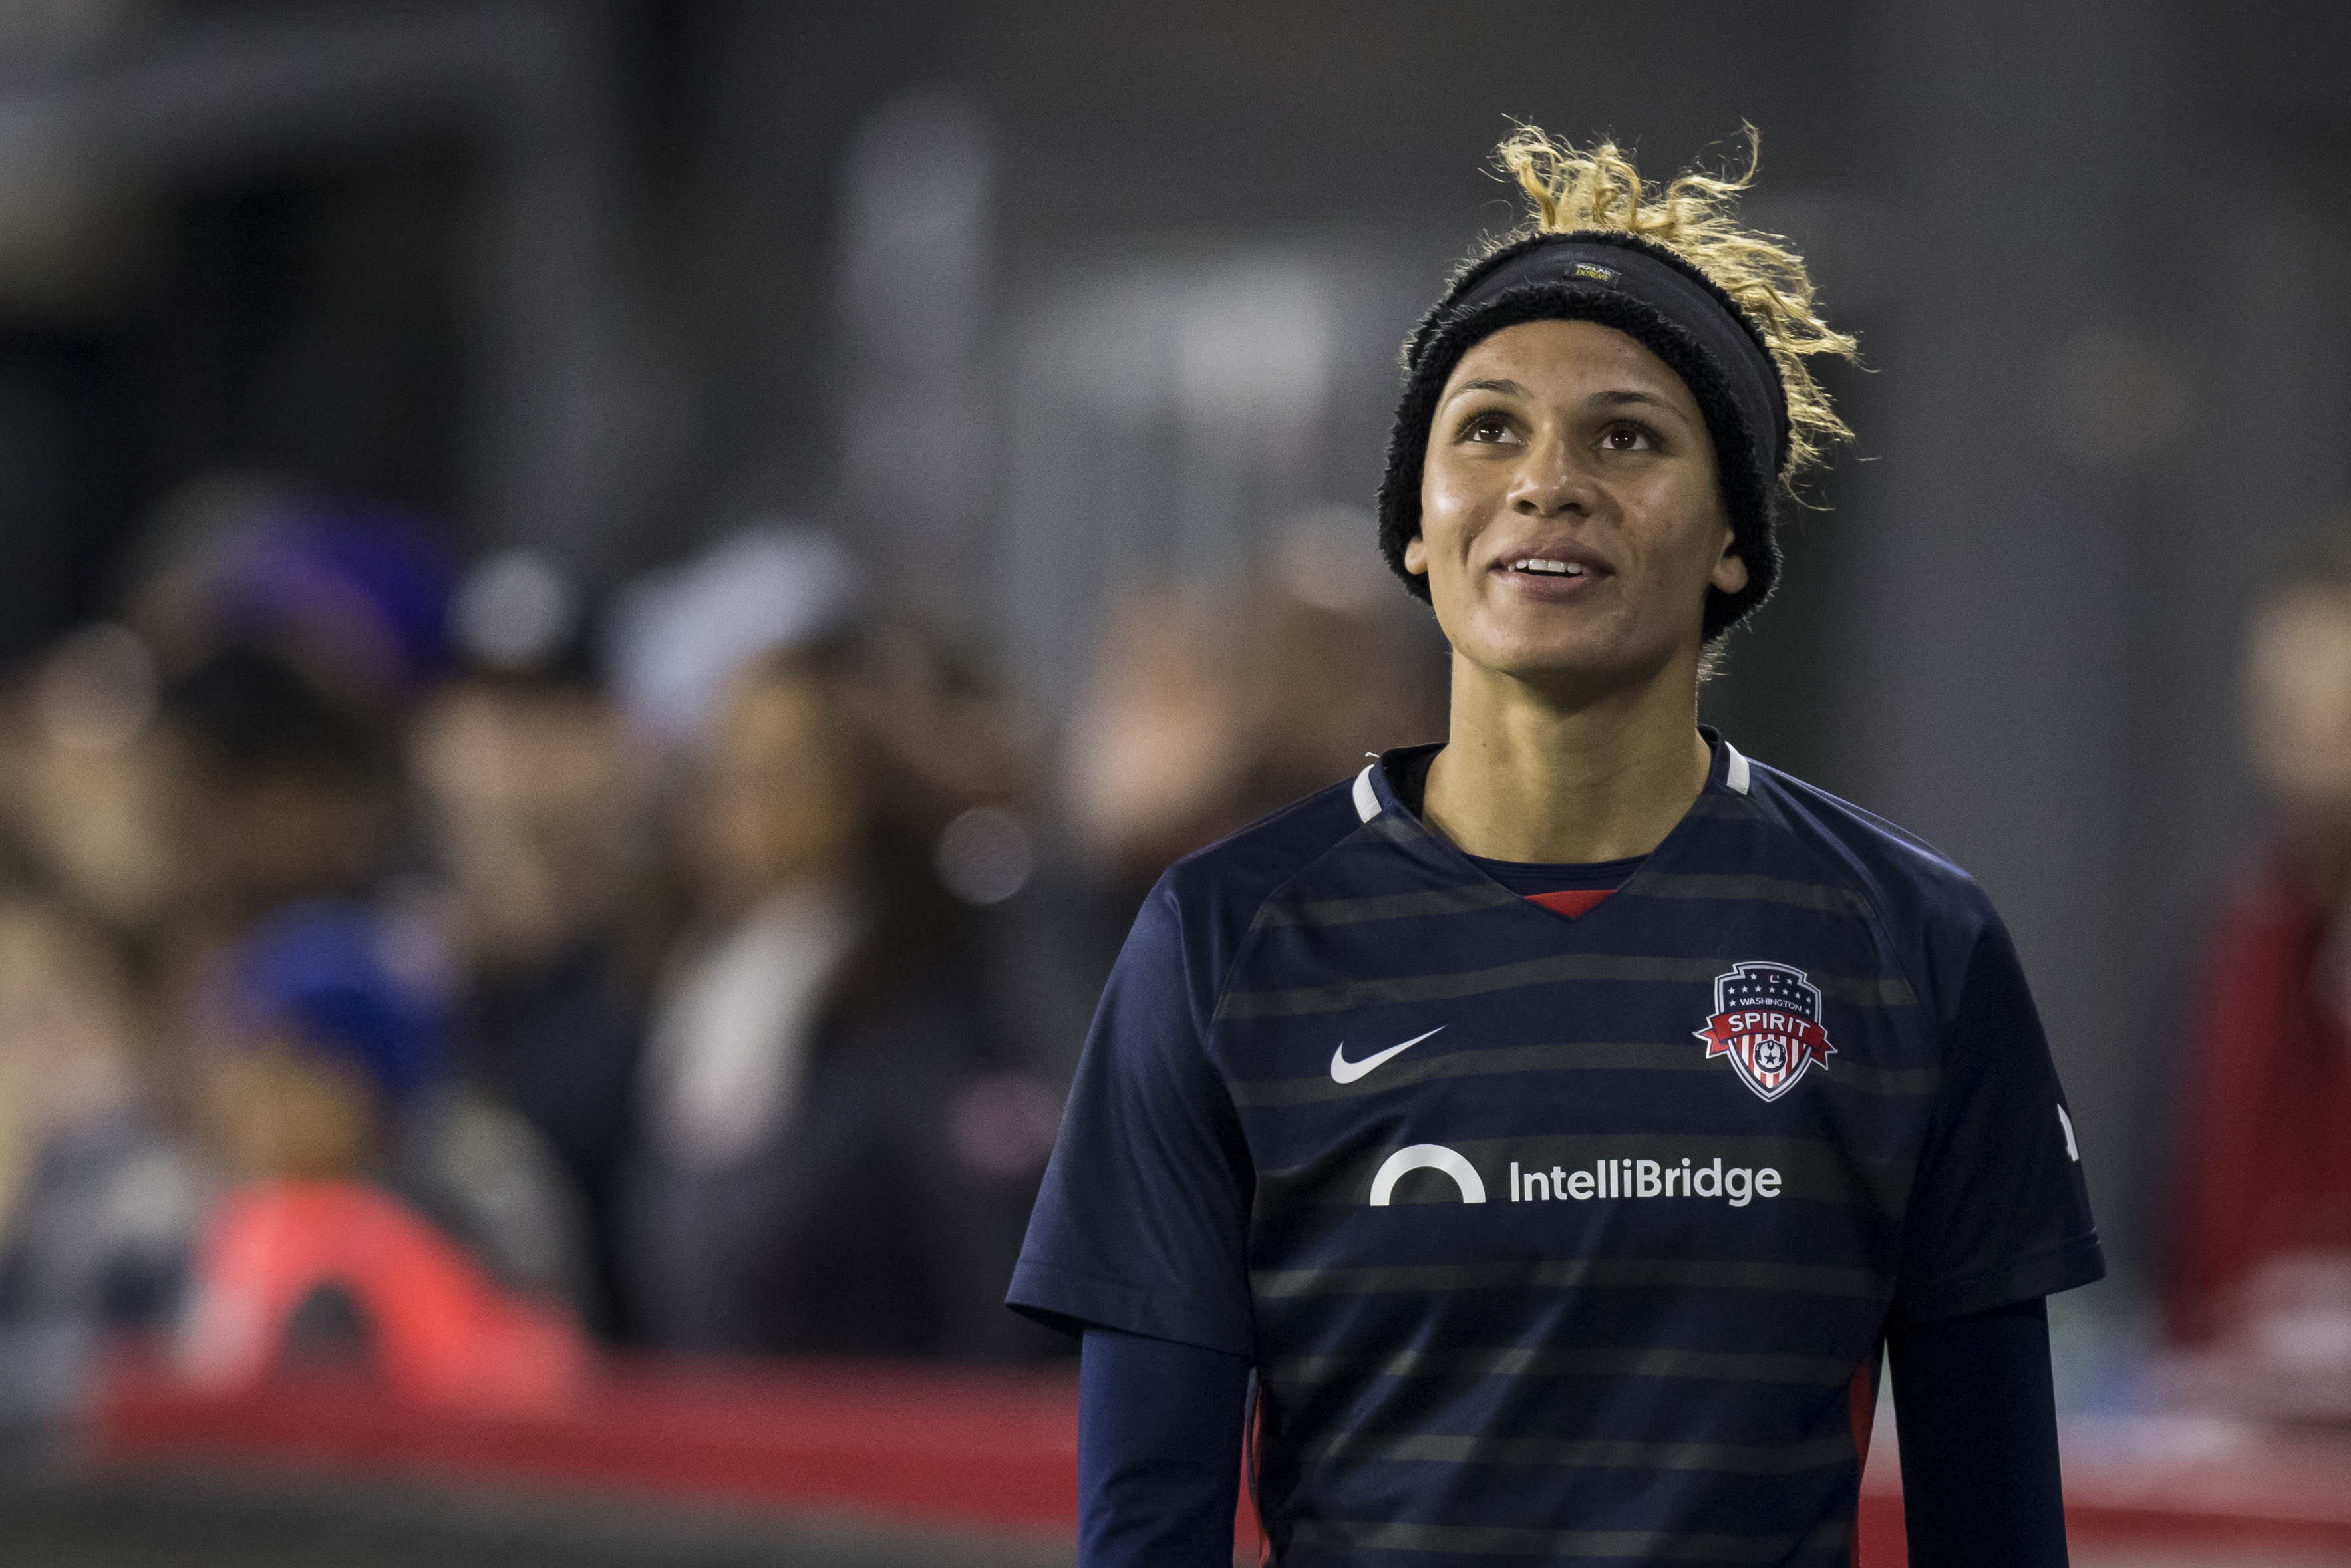 <p>Trinity Rodman -- who was born in 2002 -- is a professional athlete like her dad. After her freshman soccer season at Washington State University was postponed because of the coronavirus pandemic, she turned pro and in January 2021 was the second overall draft pick in the National Women's Soccer League. She made her debut as a forward with the Washington Spirit in April 2021 and made history just minutes into her first game, becoming the youngest American goal scorer in league history at 18. "This has been my dream forever, I've been playing soccer since I was 4 years old," she said after she was drafted, as reported by CNN. "[My father] was an amazing athlete, and I got those genes from him, but I'm excited to be known as Trinity Rodman and not just as Rodman's daughter." Despite their shared passion for sports, the pair have had a fraught relationship. "My dad doesn't play a big role in my life at all and most people don't know that, we don't see eye to eye on many things," Trinity shared on <a href="https://www.instagram.com/p/CWChHTwMium/">Instagram</a> after Dennis attended one of her games in November 2021, explaining, "I go months if not years without his presence or communication. Being in spotlights has been hard for us, him and me. We don't have the best relationship, but at the end of the day he's human I'm human… he's my dad, and I'm his little girl that will never change. I will improve and look forward everyday as I hope he does."</p>